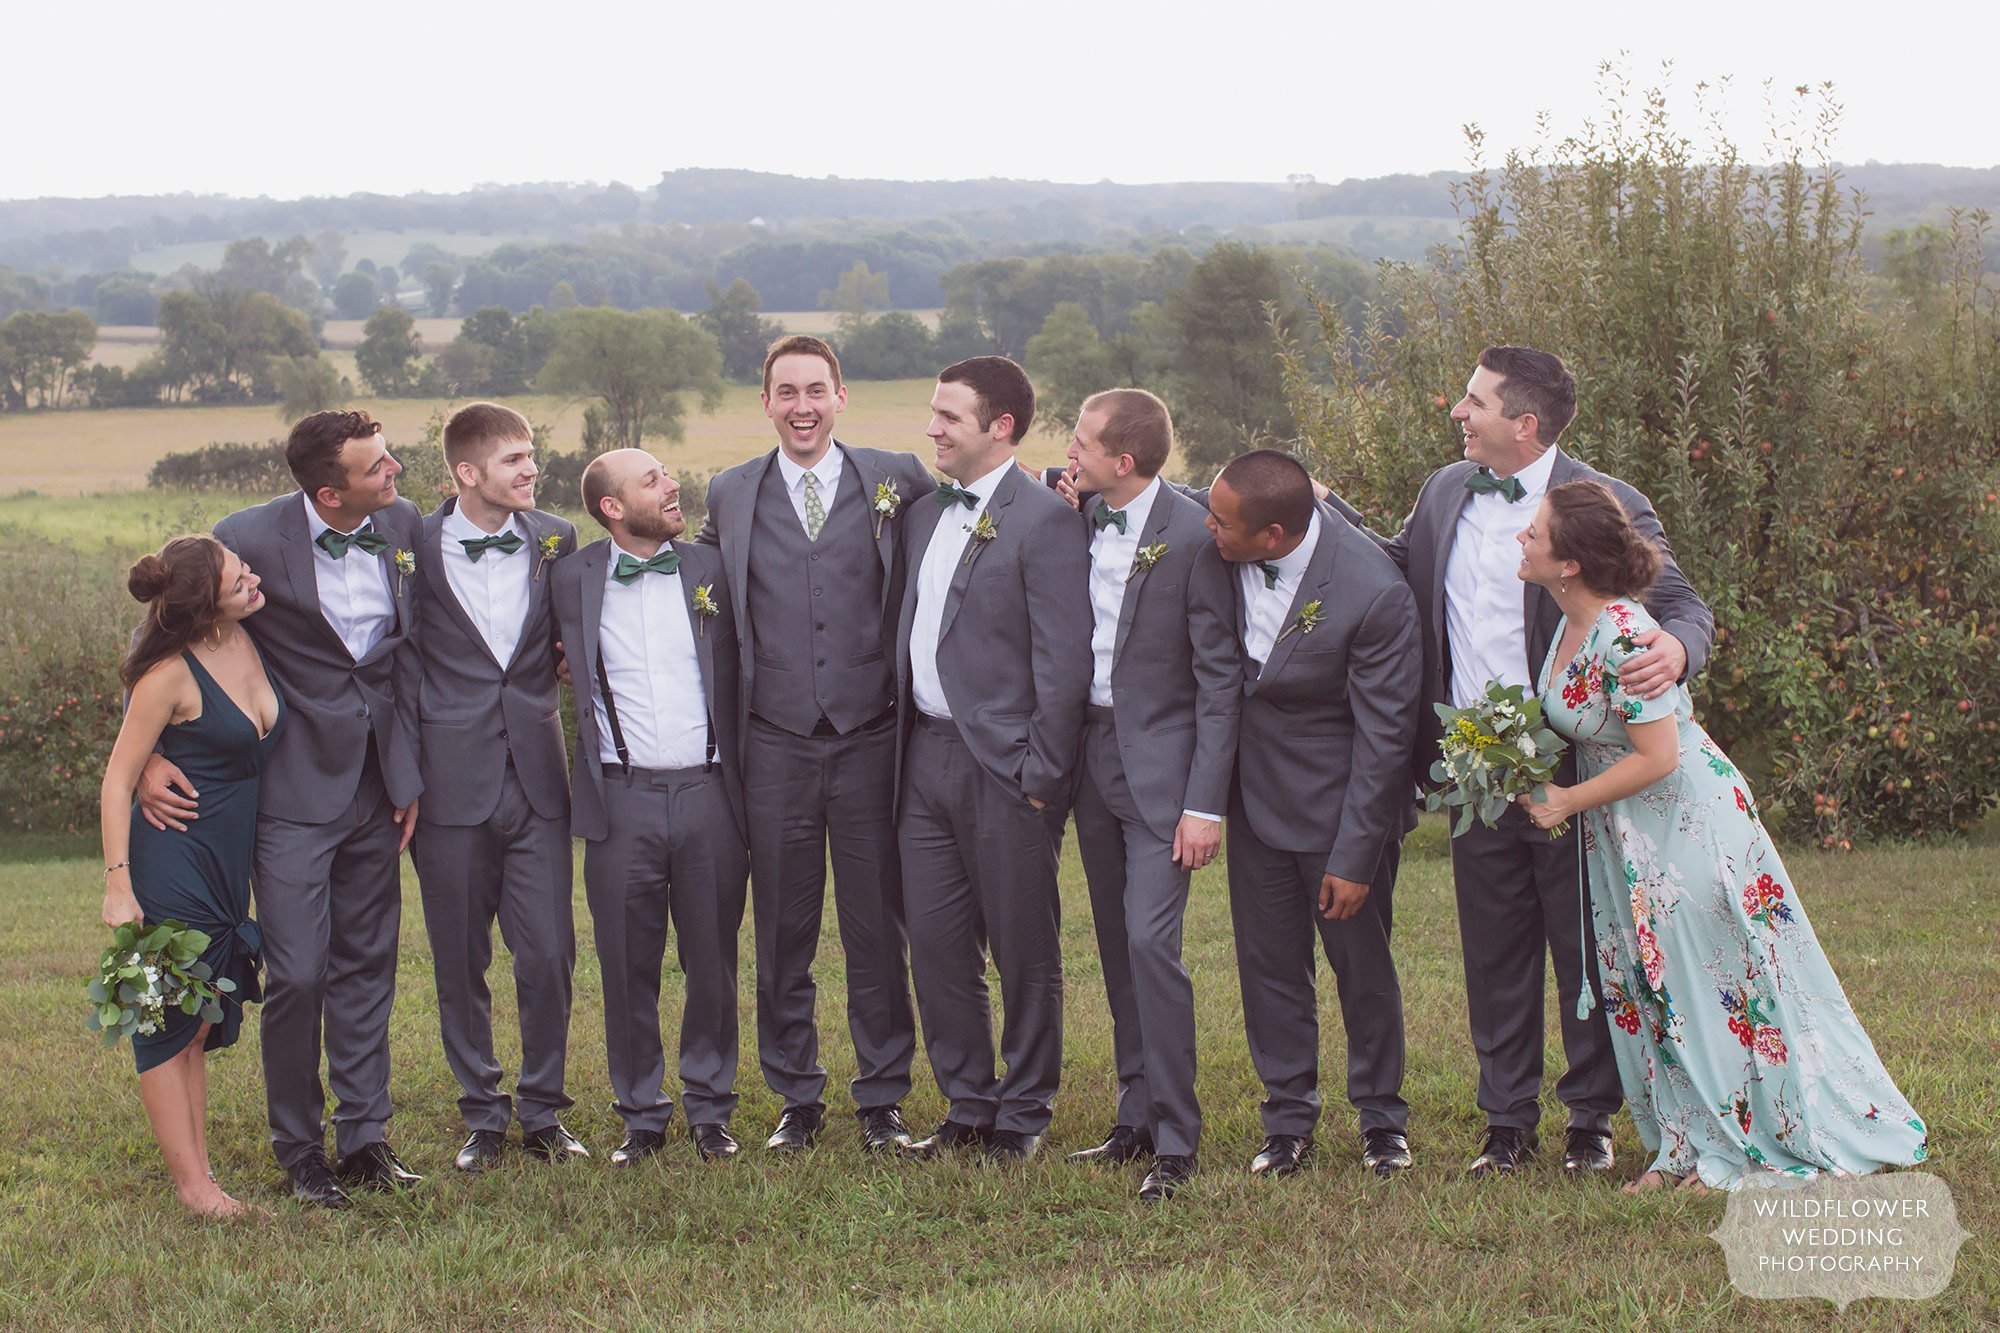 Funny groom with groomsmen picture at this Missouri barn wedding.